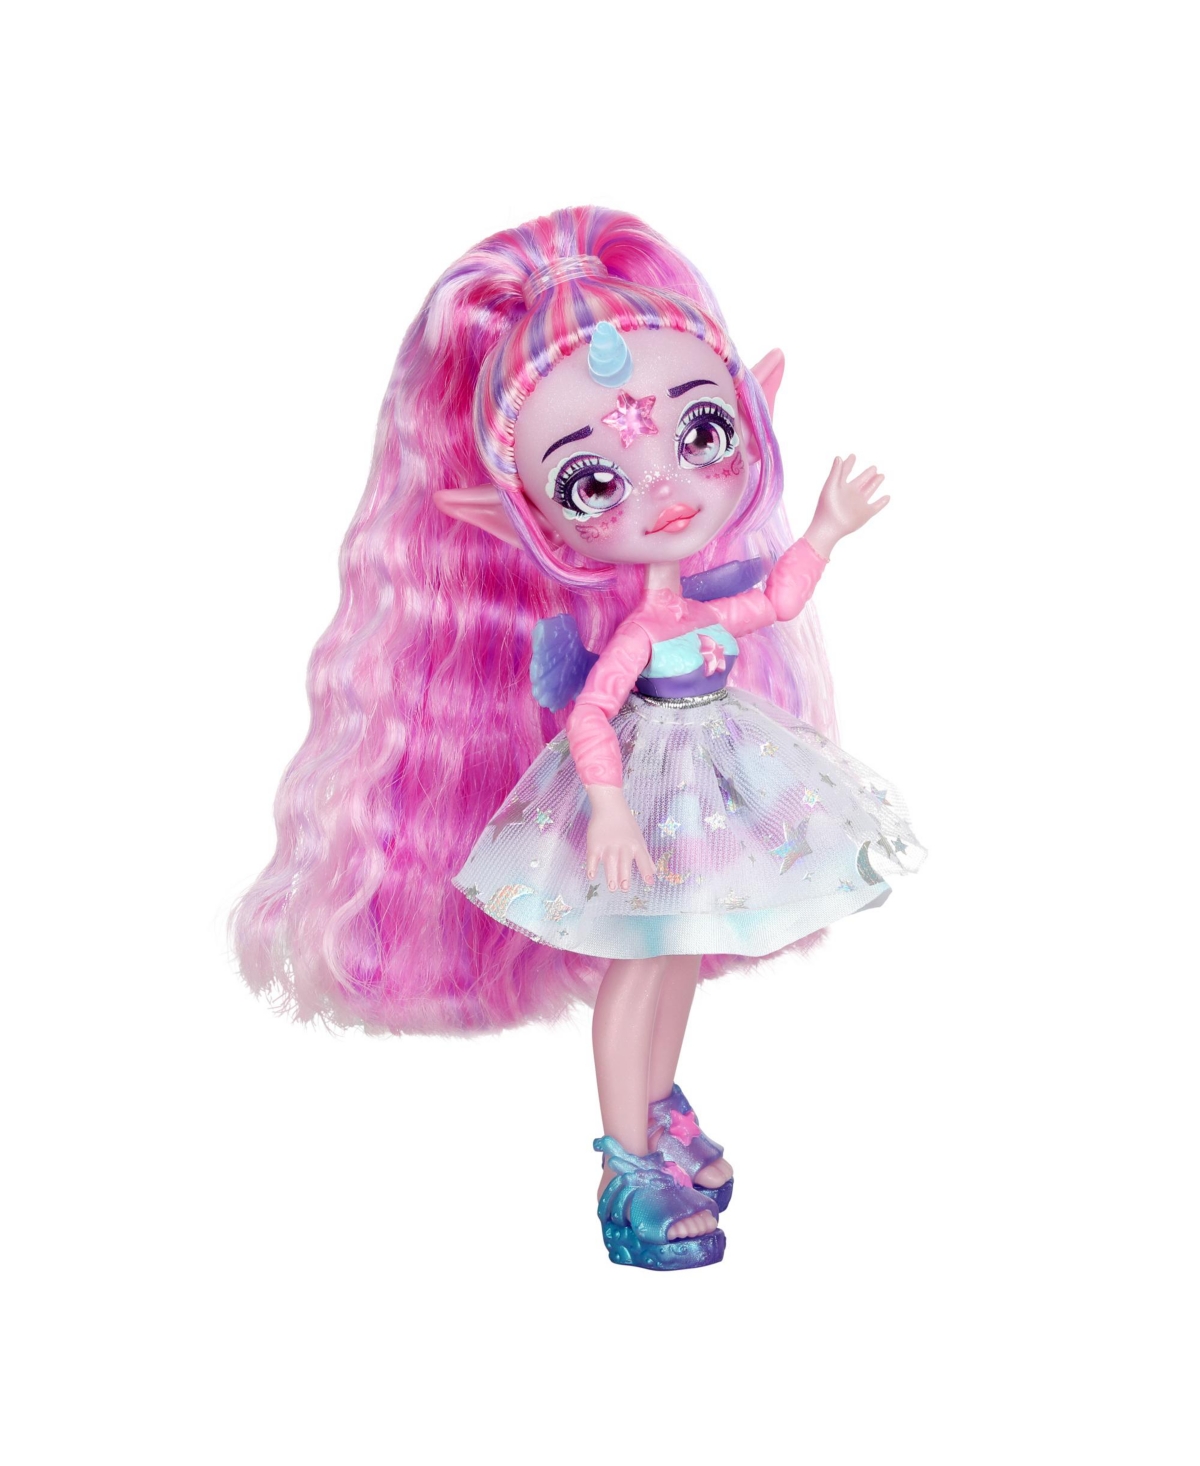 Shop Macy's Pixling Doll Series 1, Purple In Multi Color